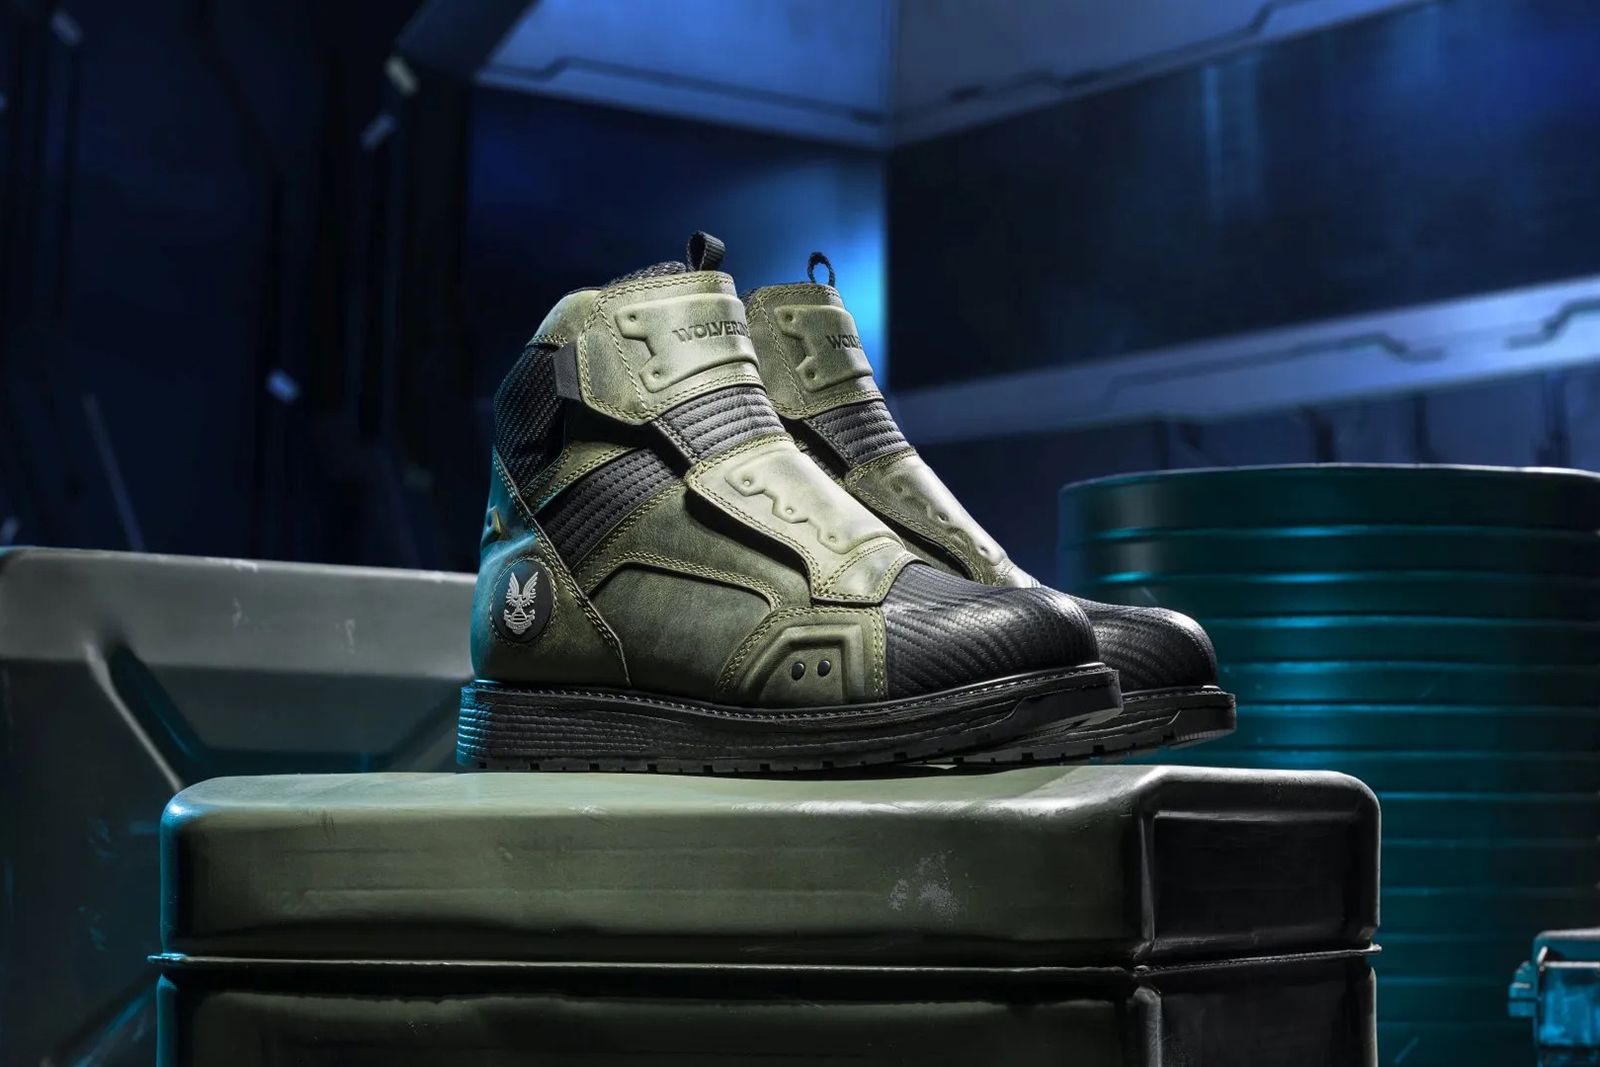 Wolverine x Halo boots literally put you in Master Chief's shoes photo 1